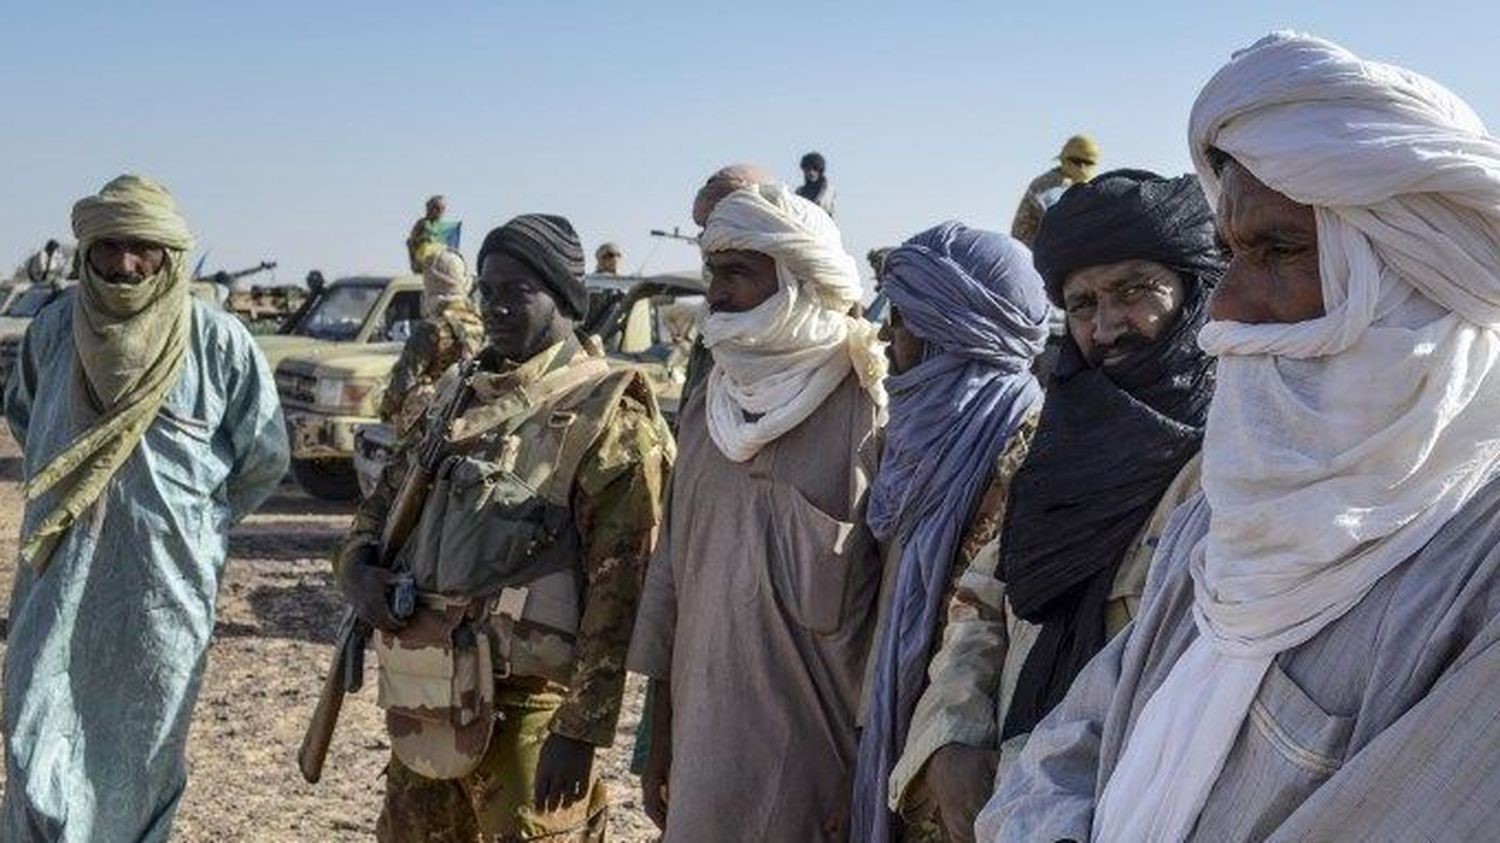 Mali’s authorities and separatists : time for effective dialogue